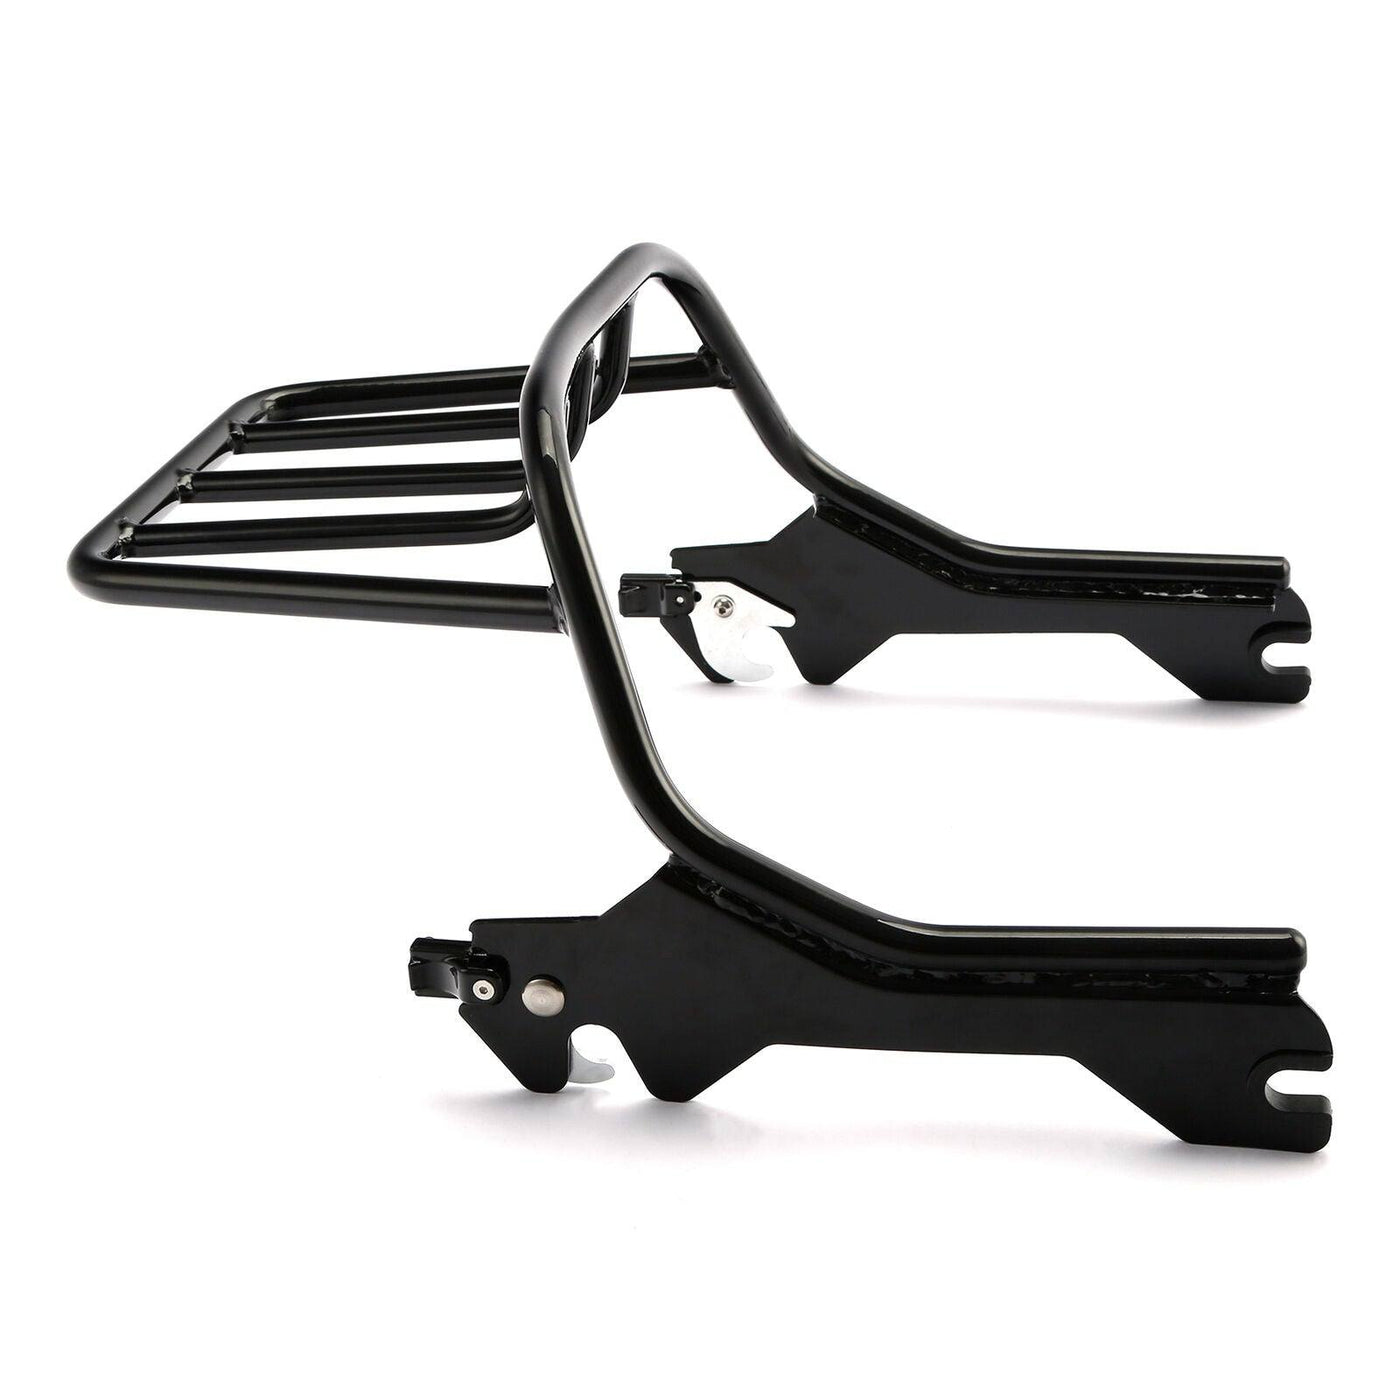 Two Up Luggage Rack Fit For Harley Softail Fat Boy 114 18-21 Breakout 114 18-20 - Moto Life Products